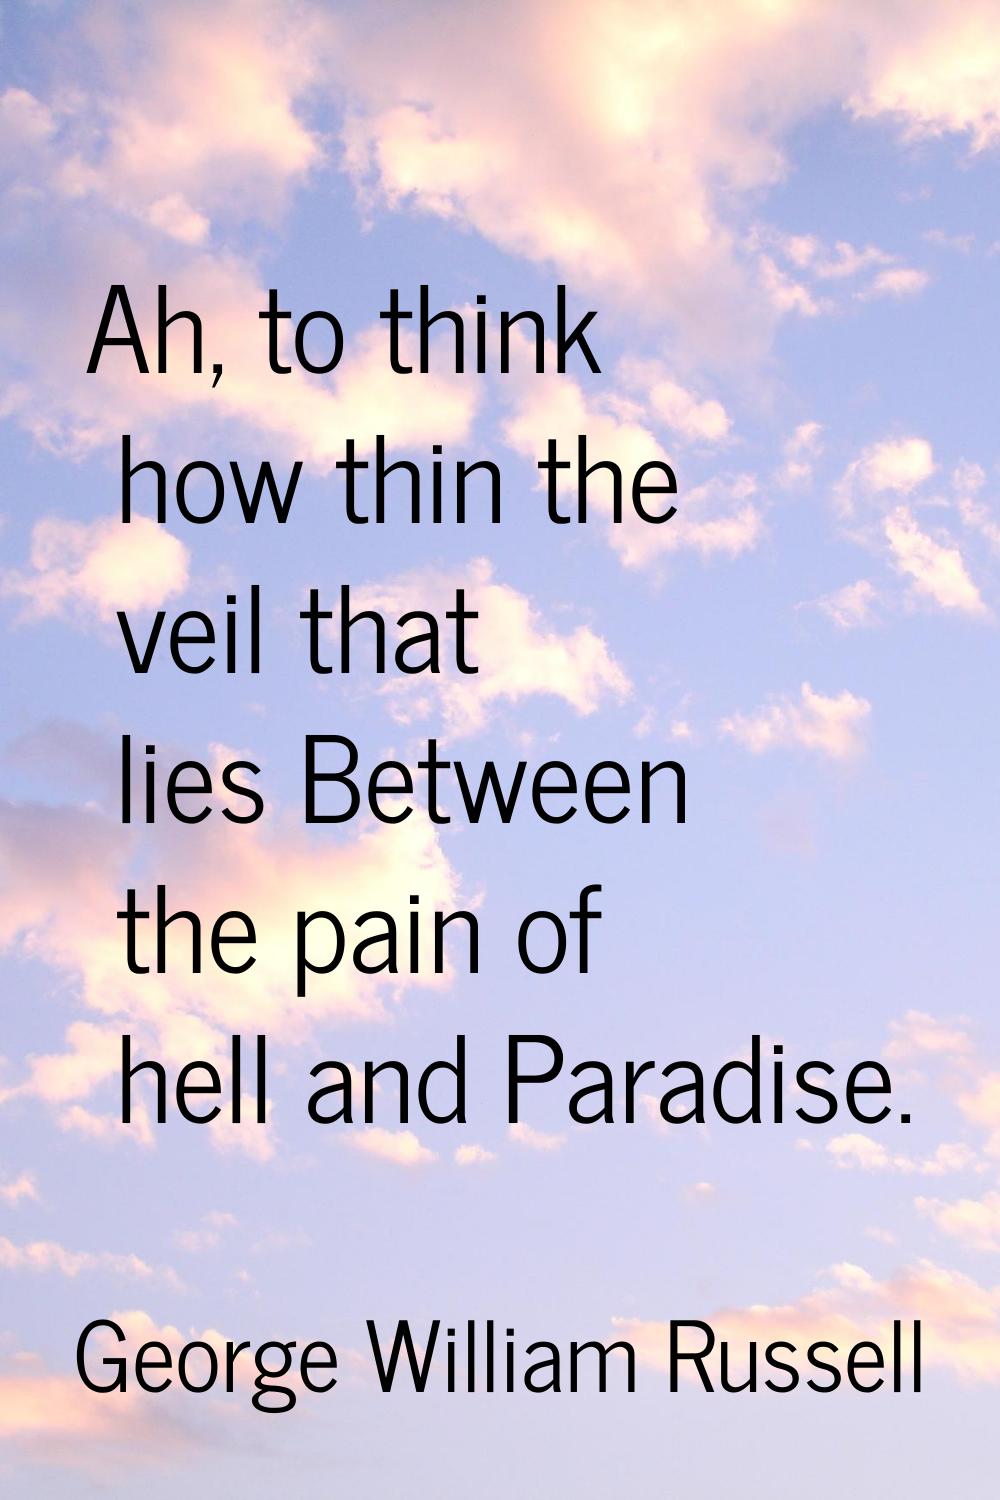 Ah, to think how thin the veil that lies Between the pain of hell and Paradise.